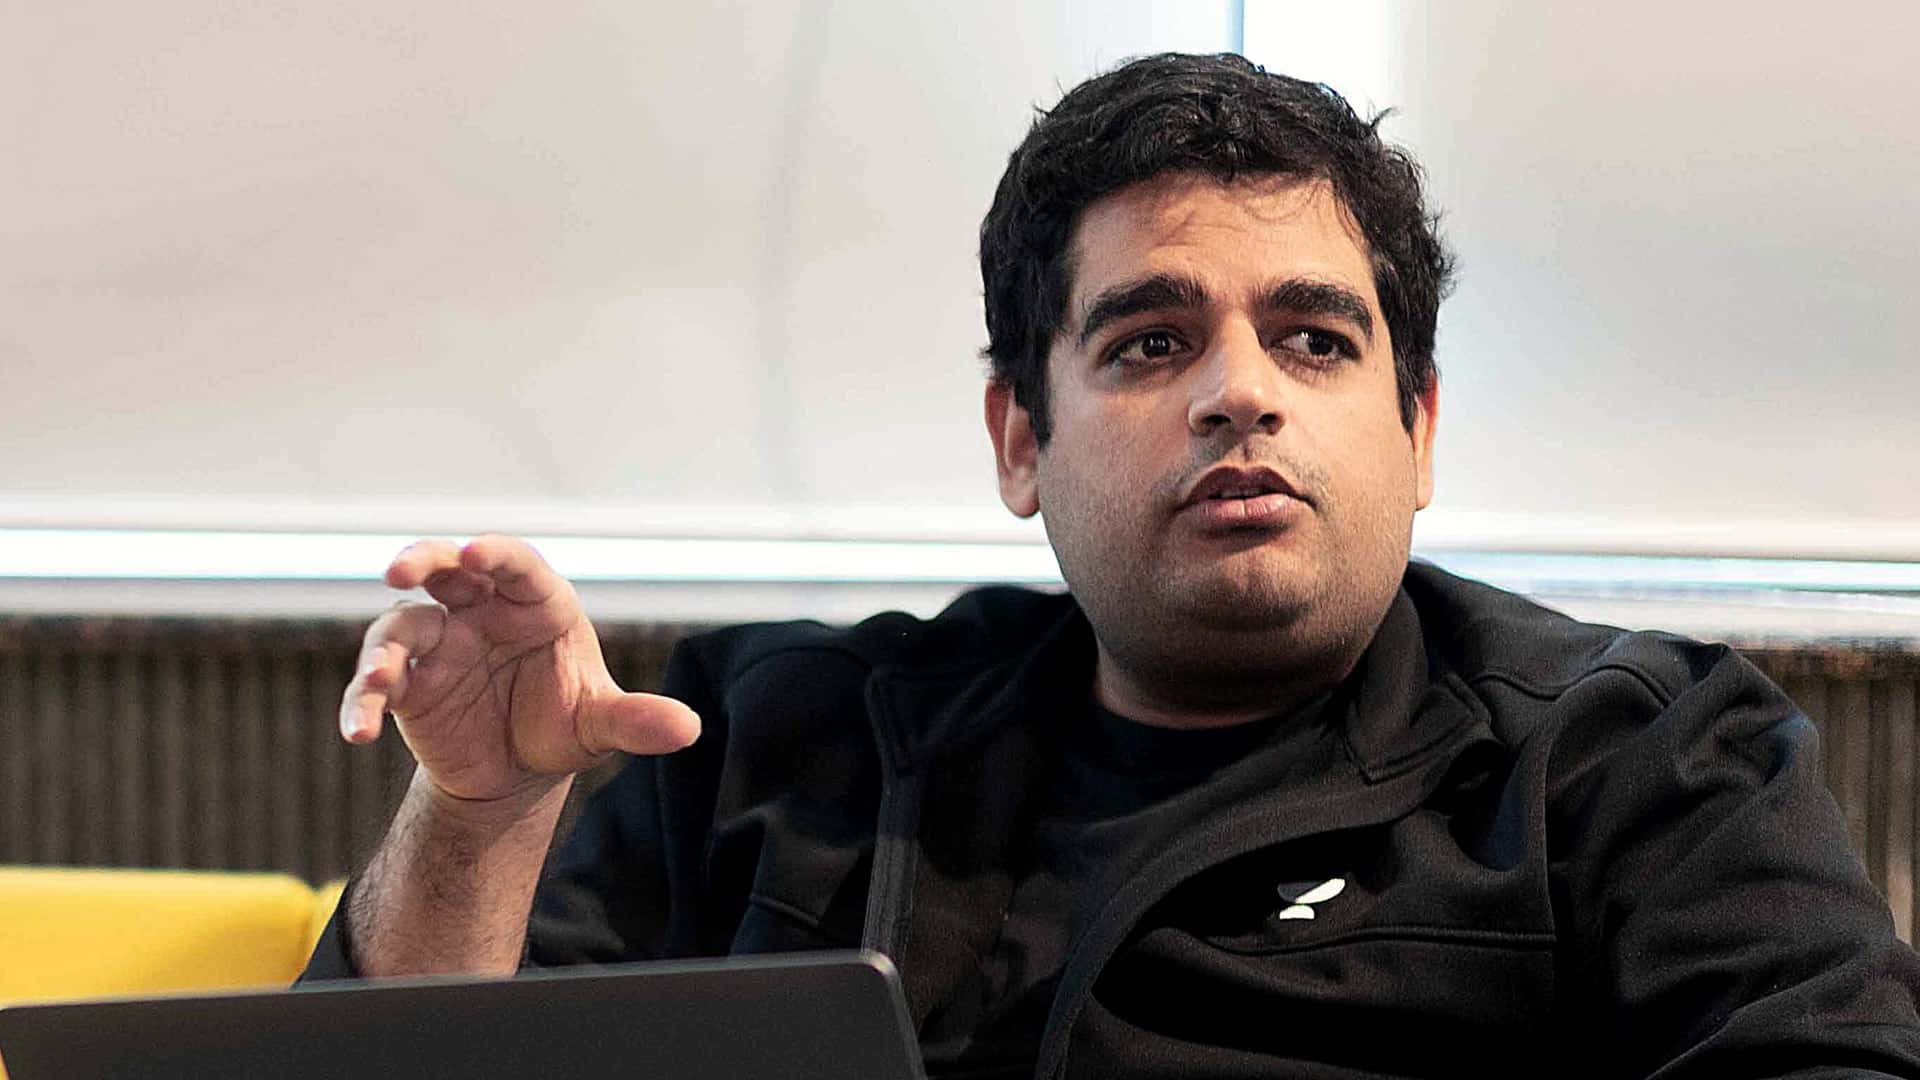 Unacademy to lay off 12 pc employees as it aims to turn core biz profitable: CEO